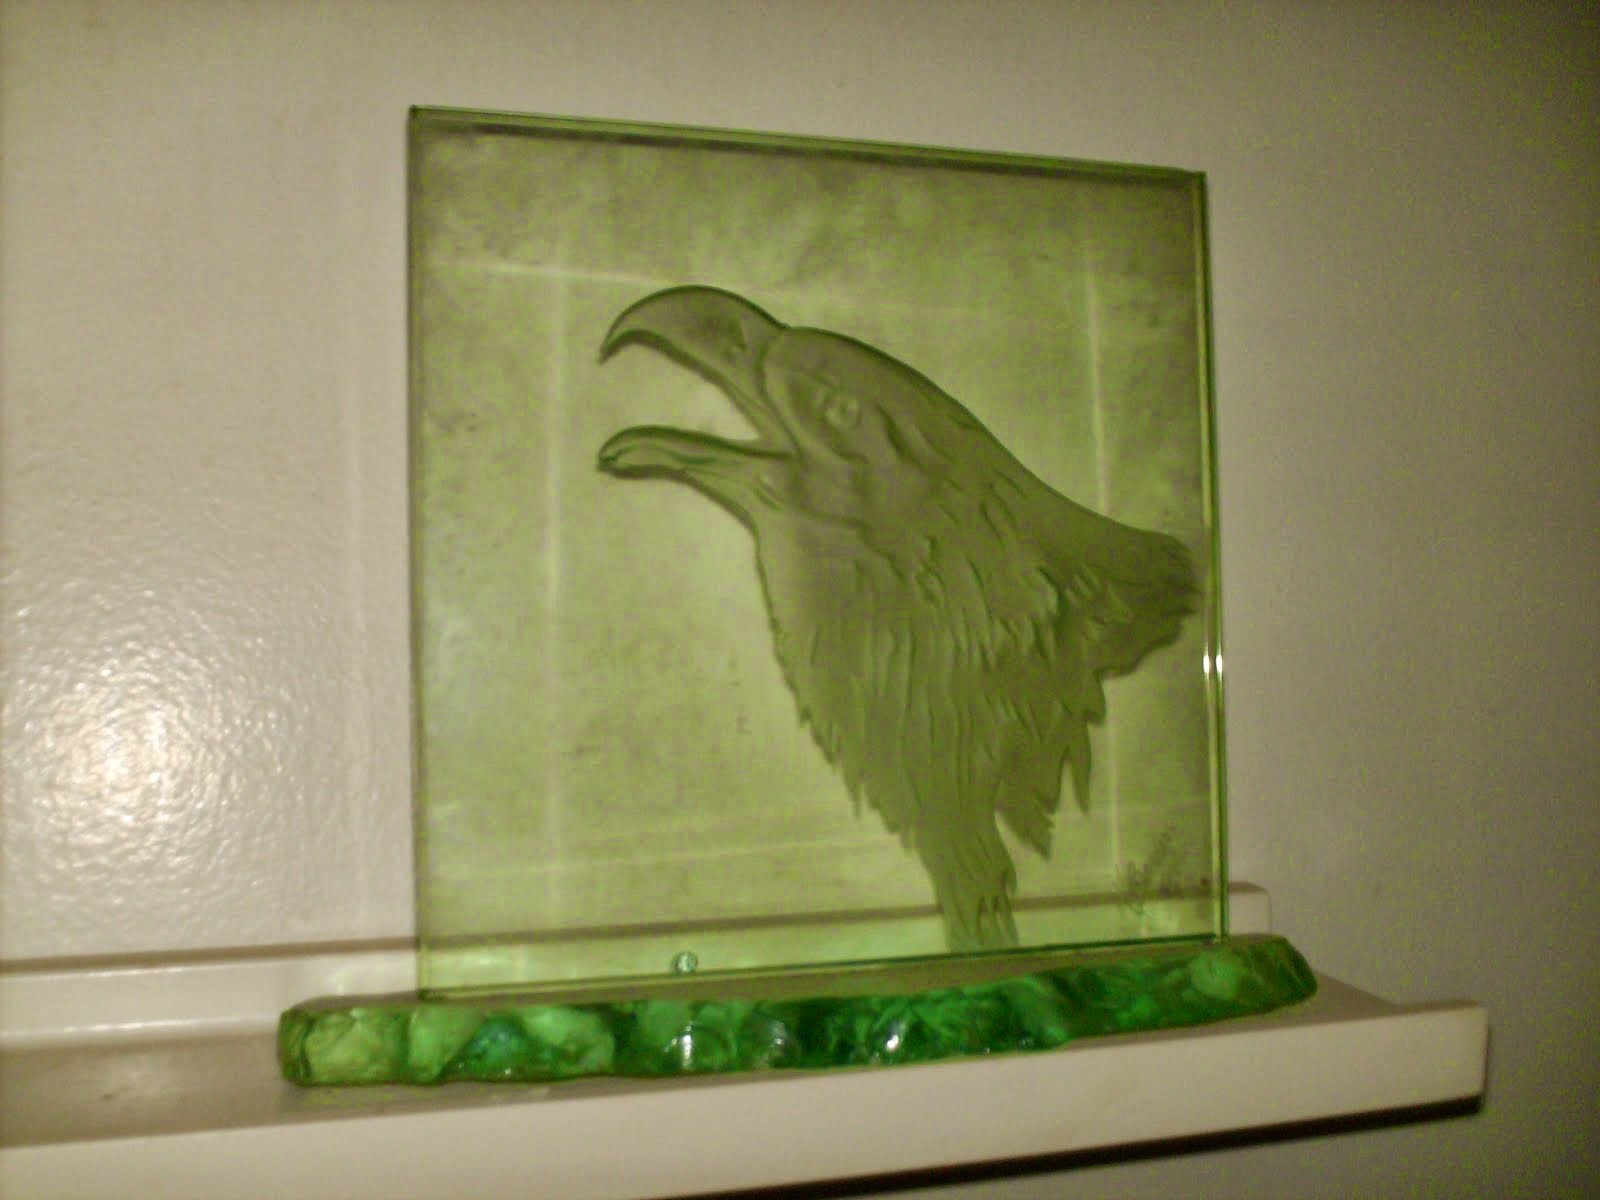 the first study of glass 1993